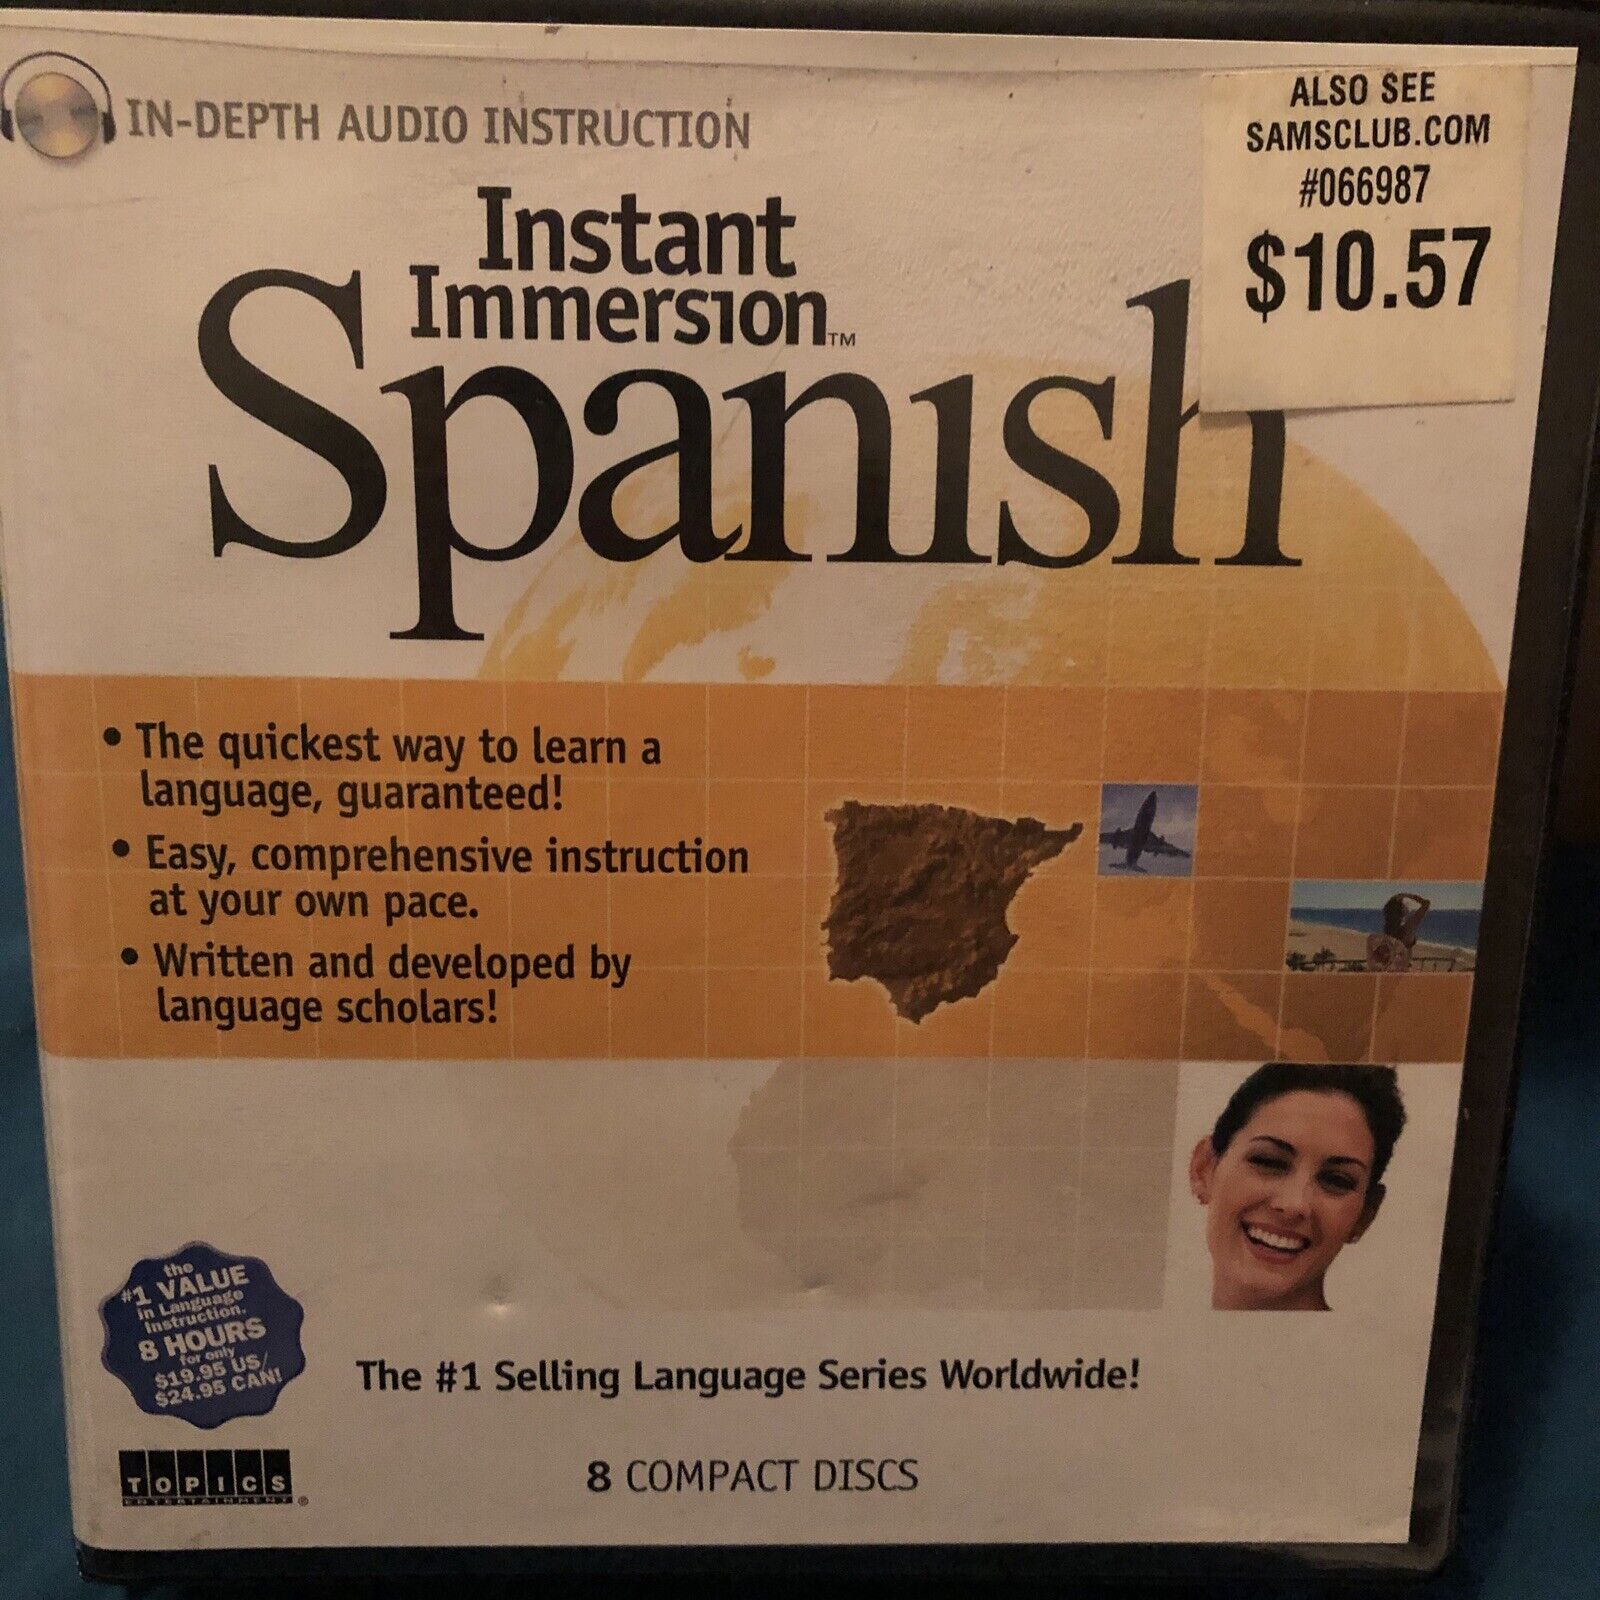 Instant Immersion Spanish In Depth Audio Instruction #1 Series Worldwide